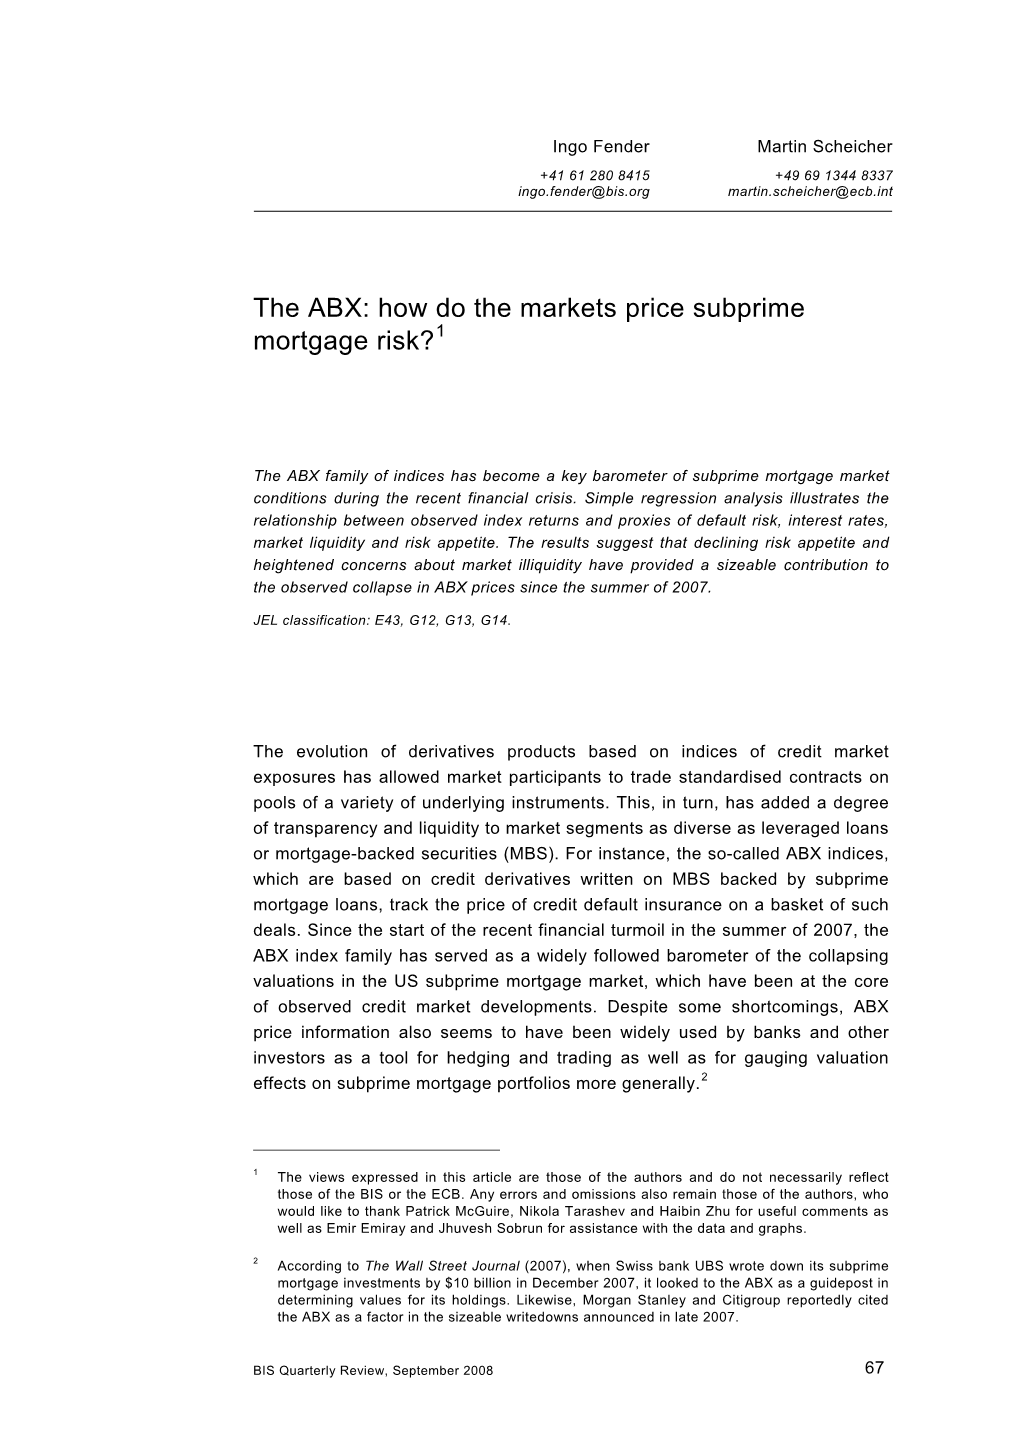 The ABX: How Do the Markets Price Subprime Mortgage Risk?1